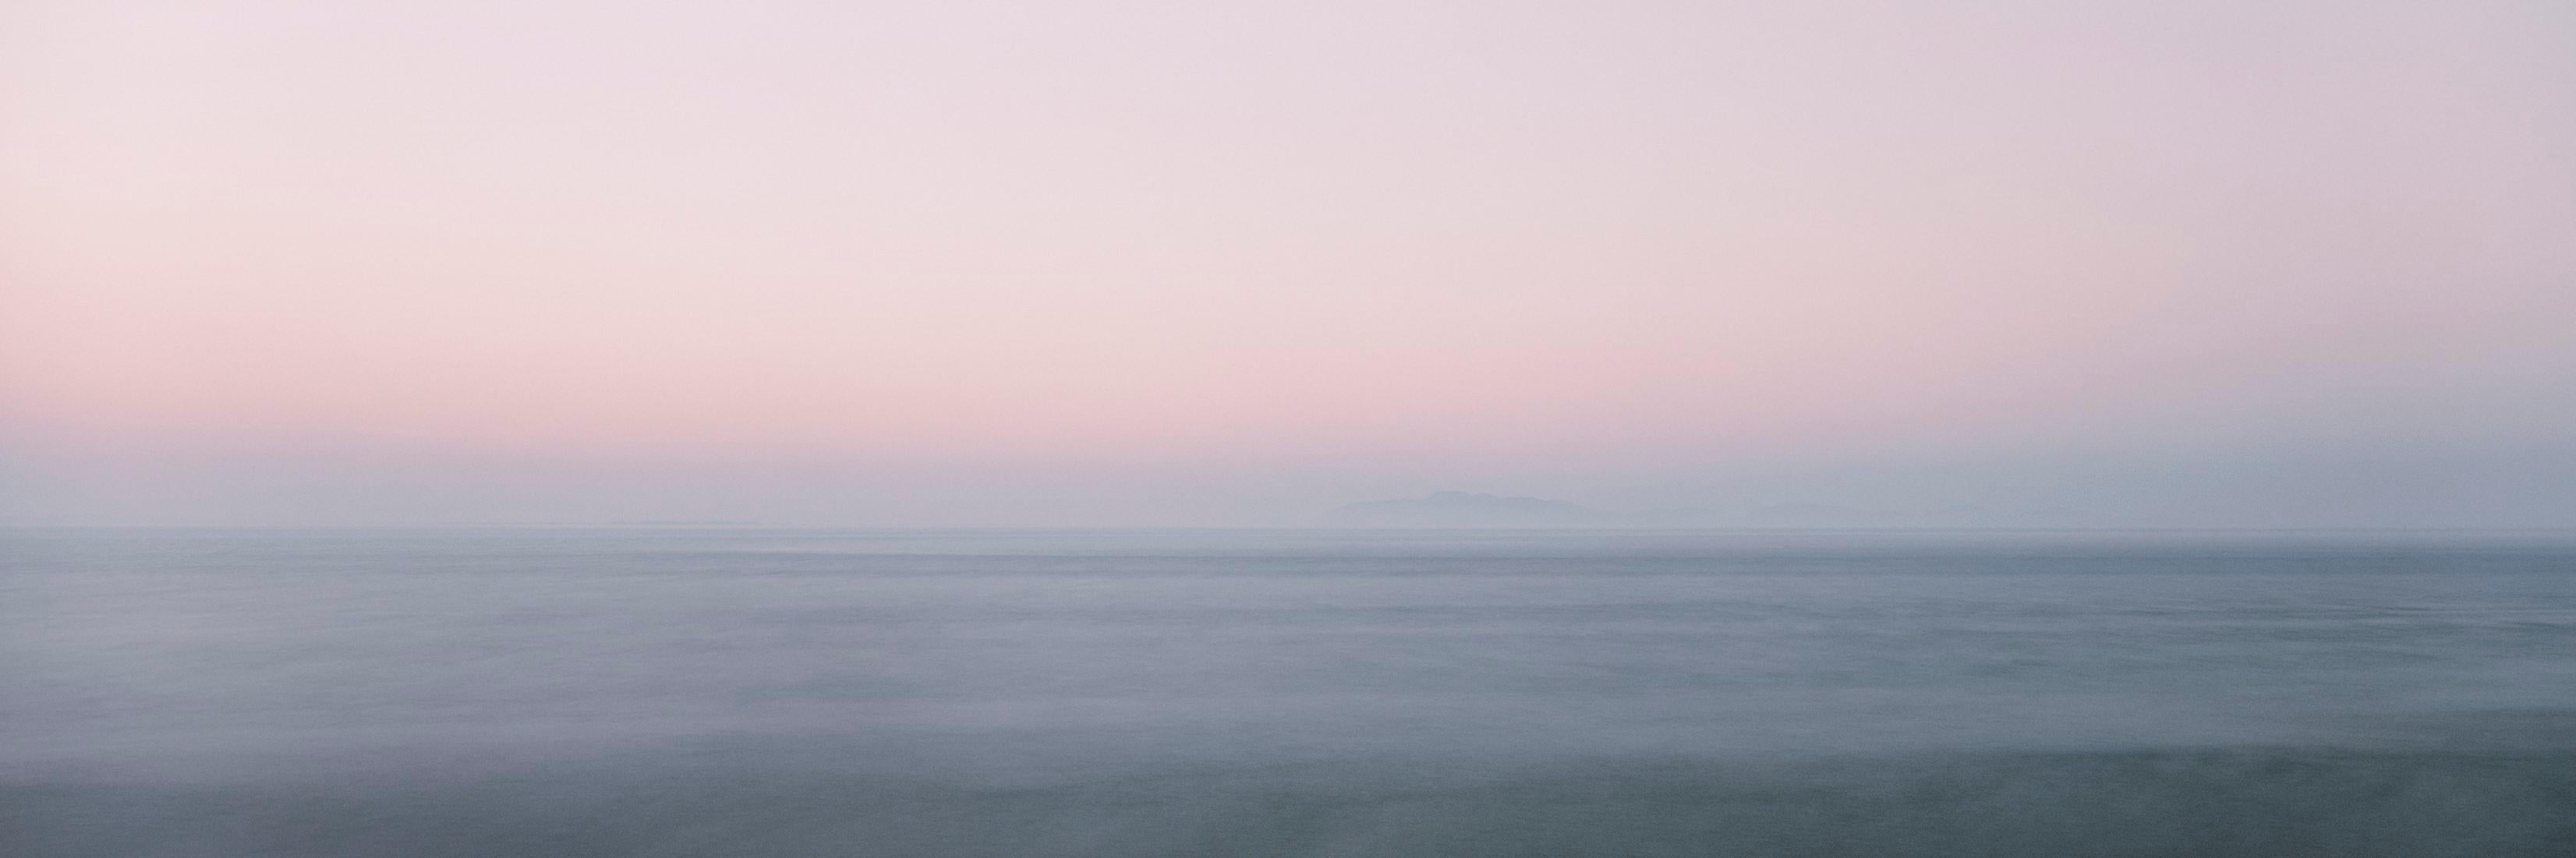  Geojeon, Fog at Sunset (Photograph, Print, Sunset, Pink Skies, Peaceful Waters)